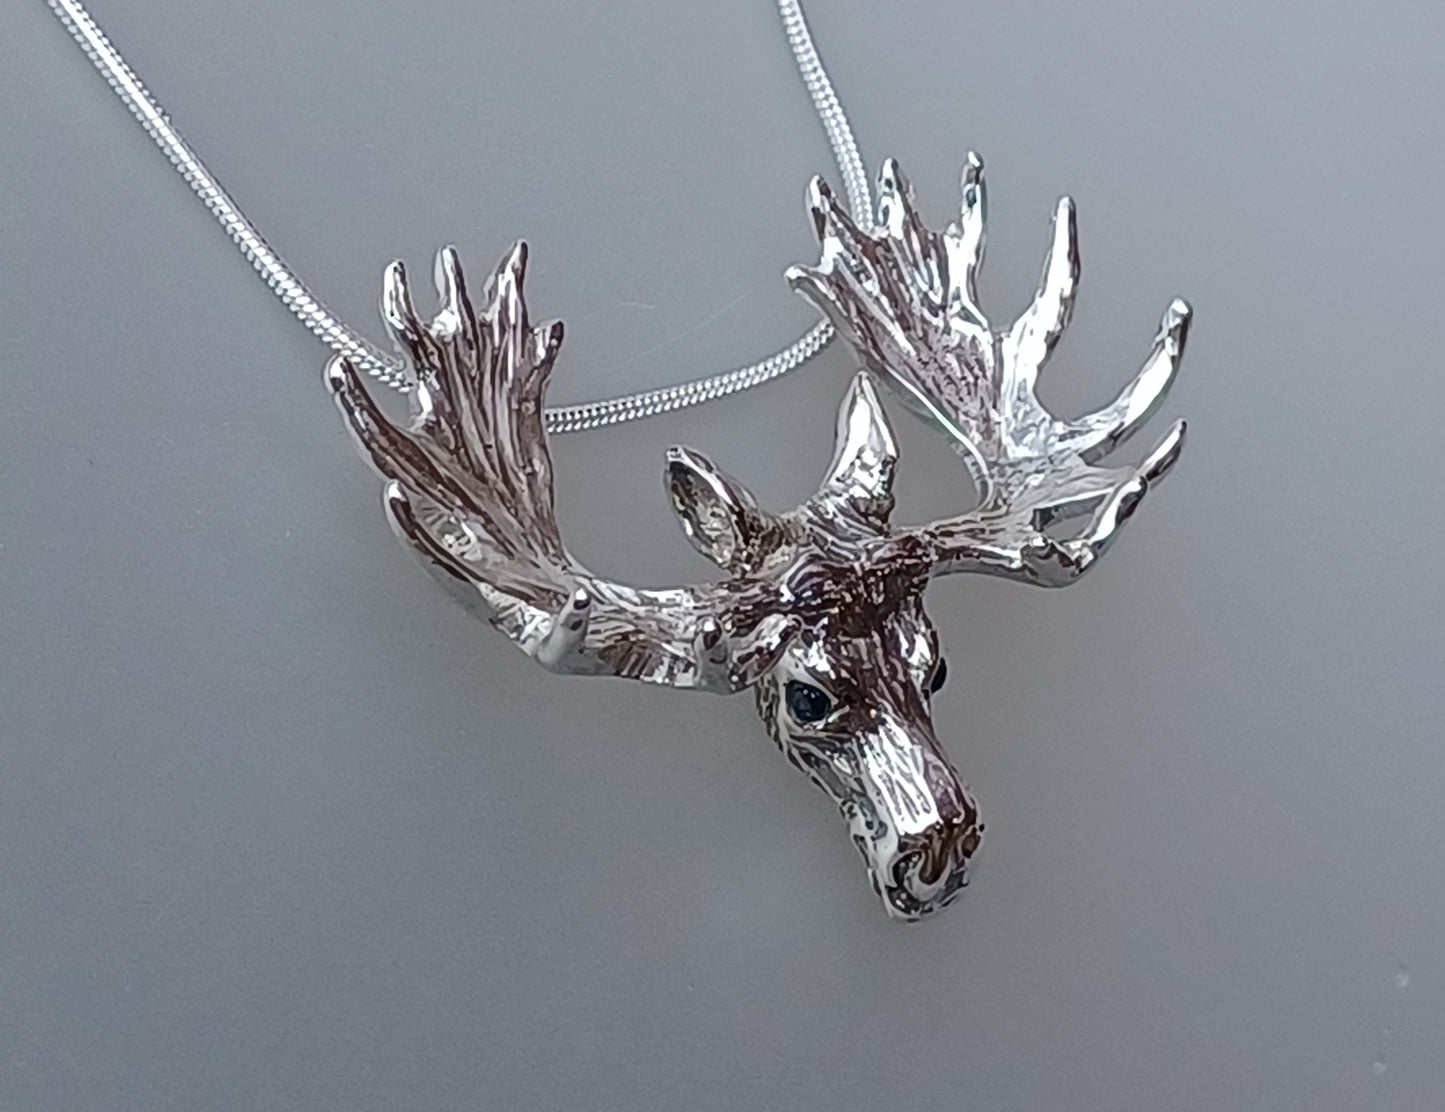 Impressive Moose Pendant and Chain Sterling Silver Necklace Sapphire Eyes